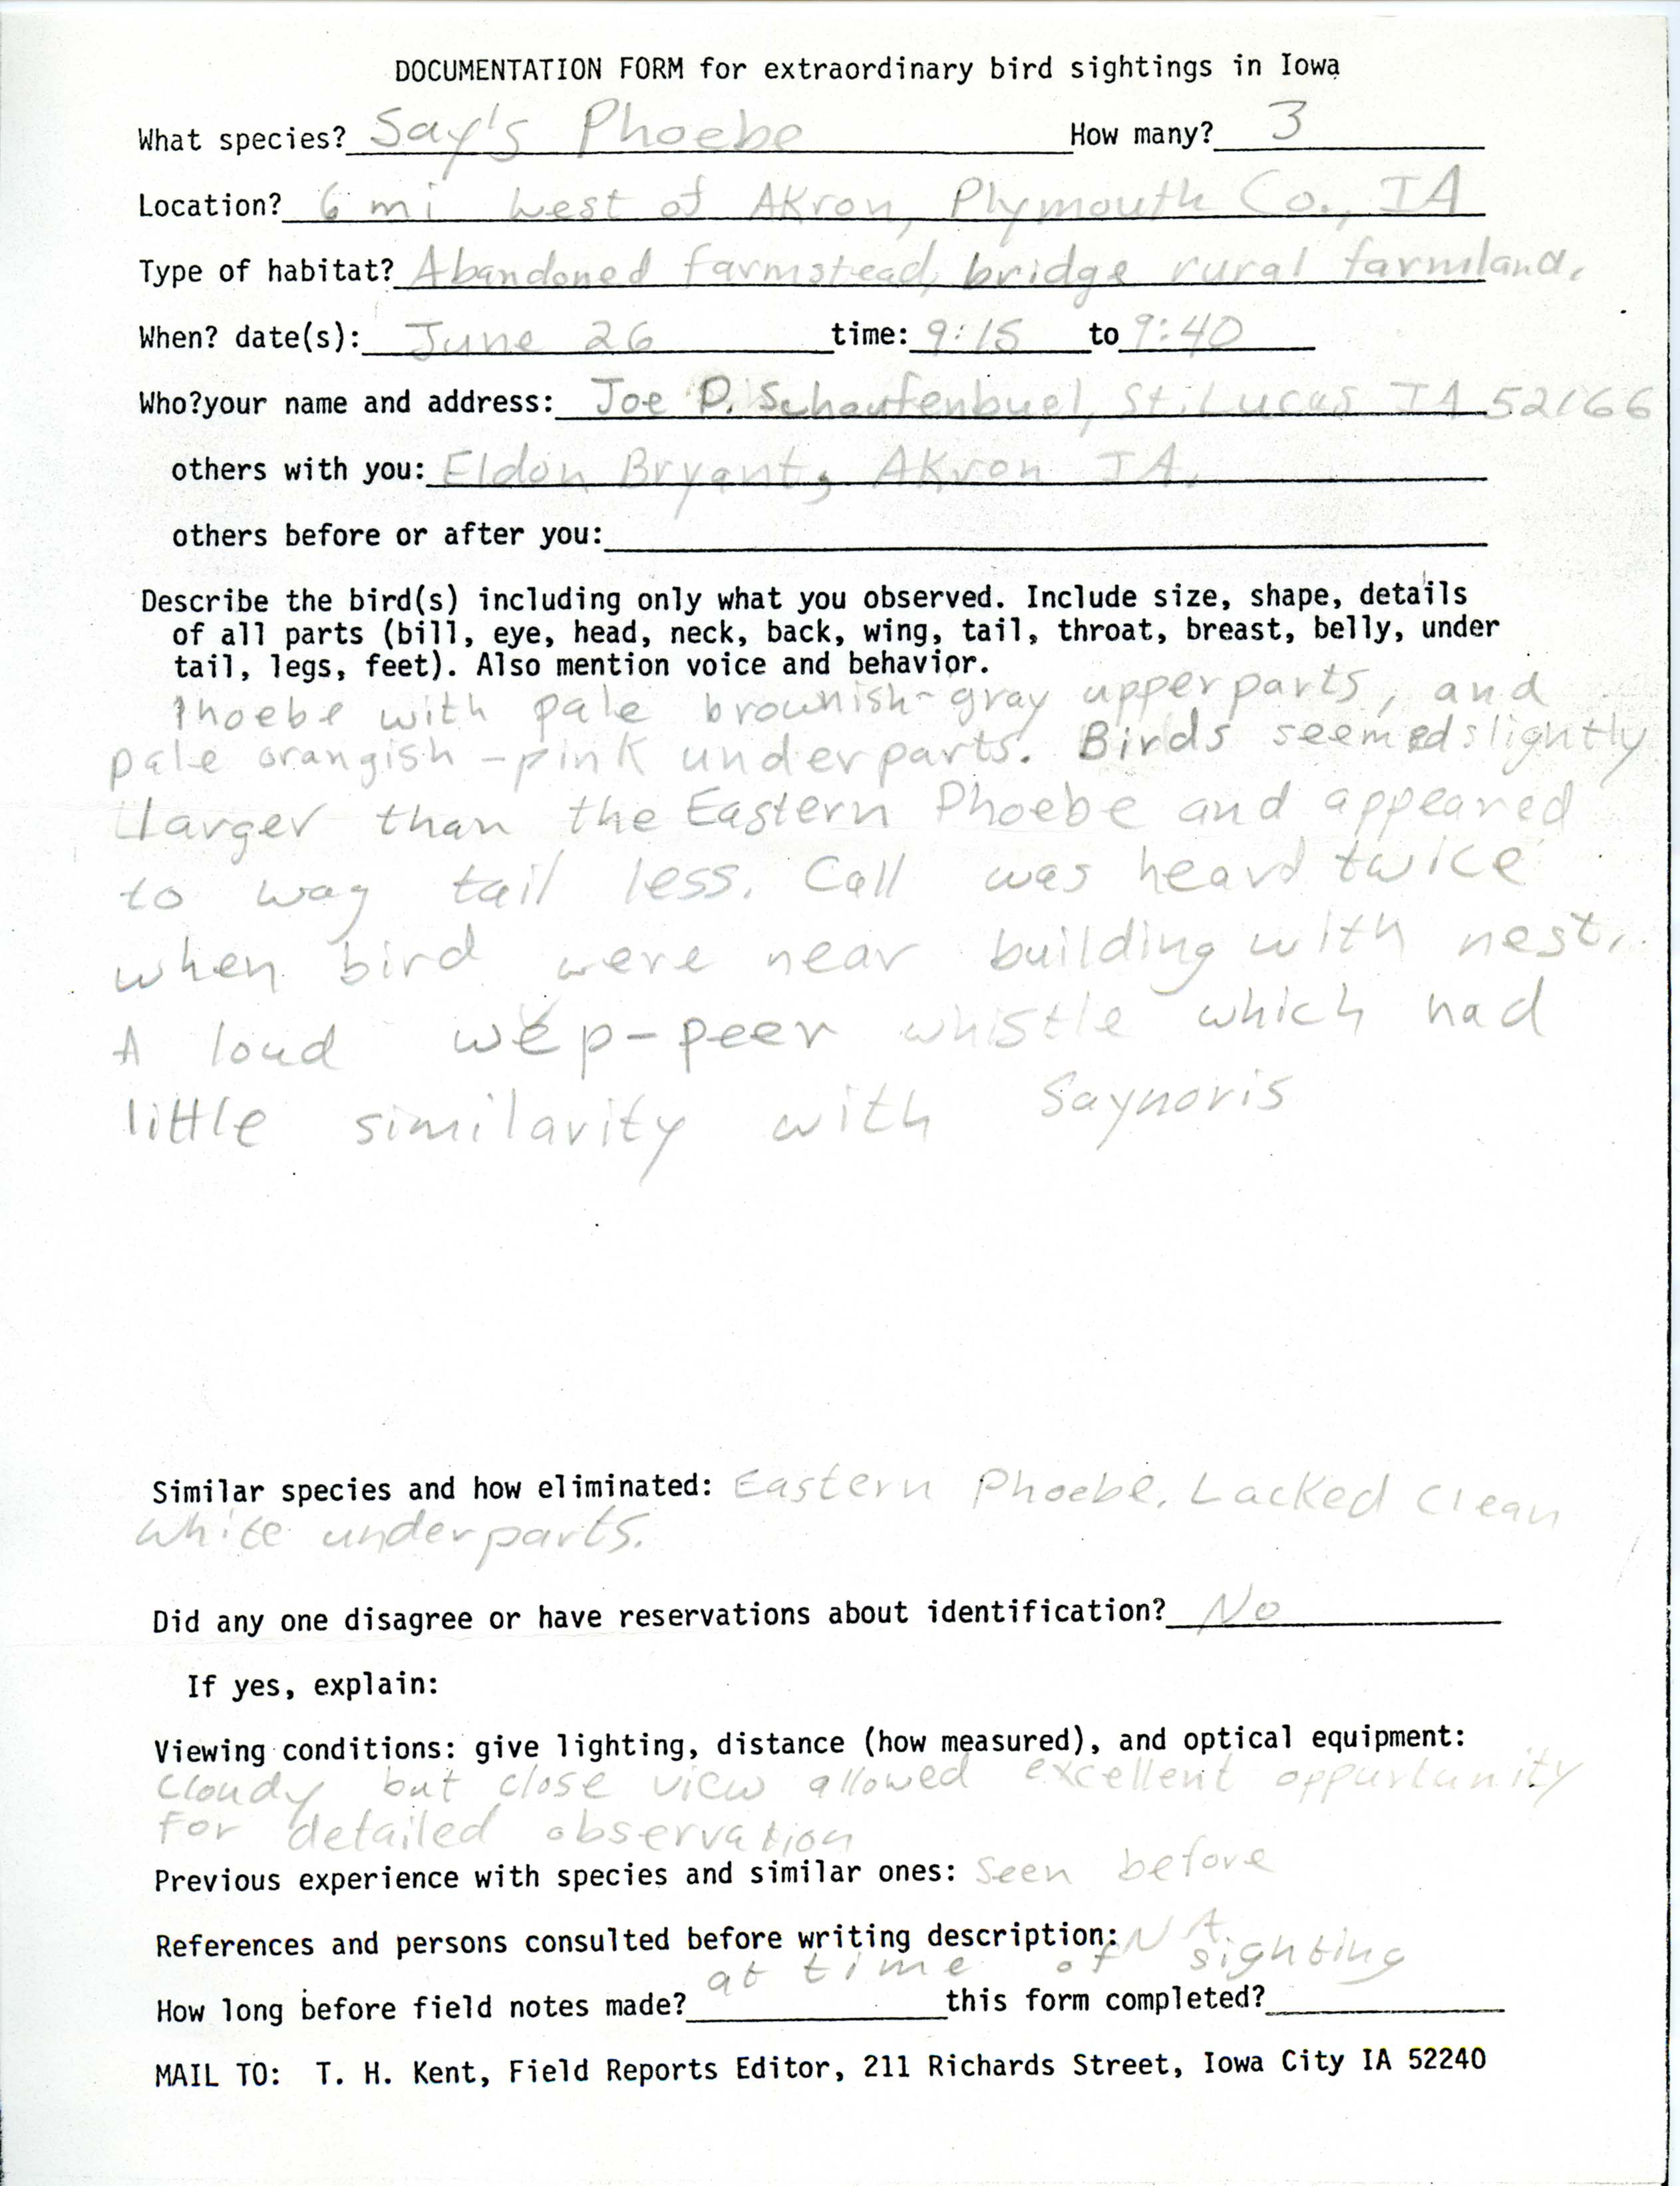 Rare bird documentation form for Say's Phoebe west of Akron in 1982